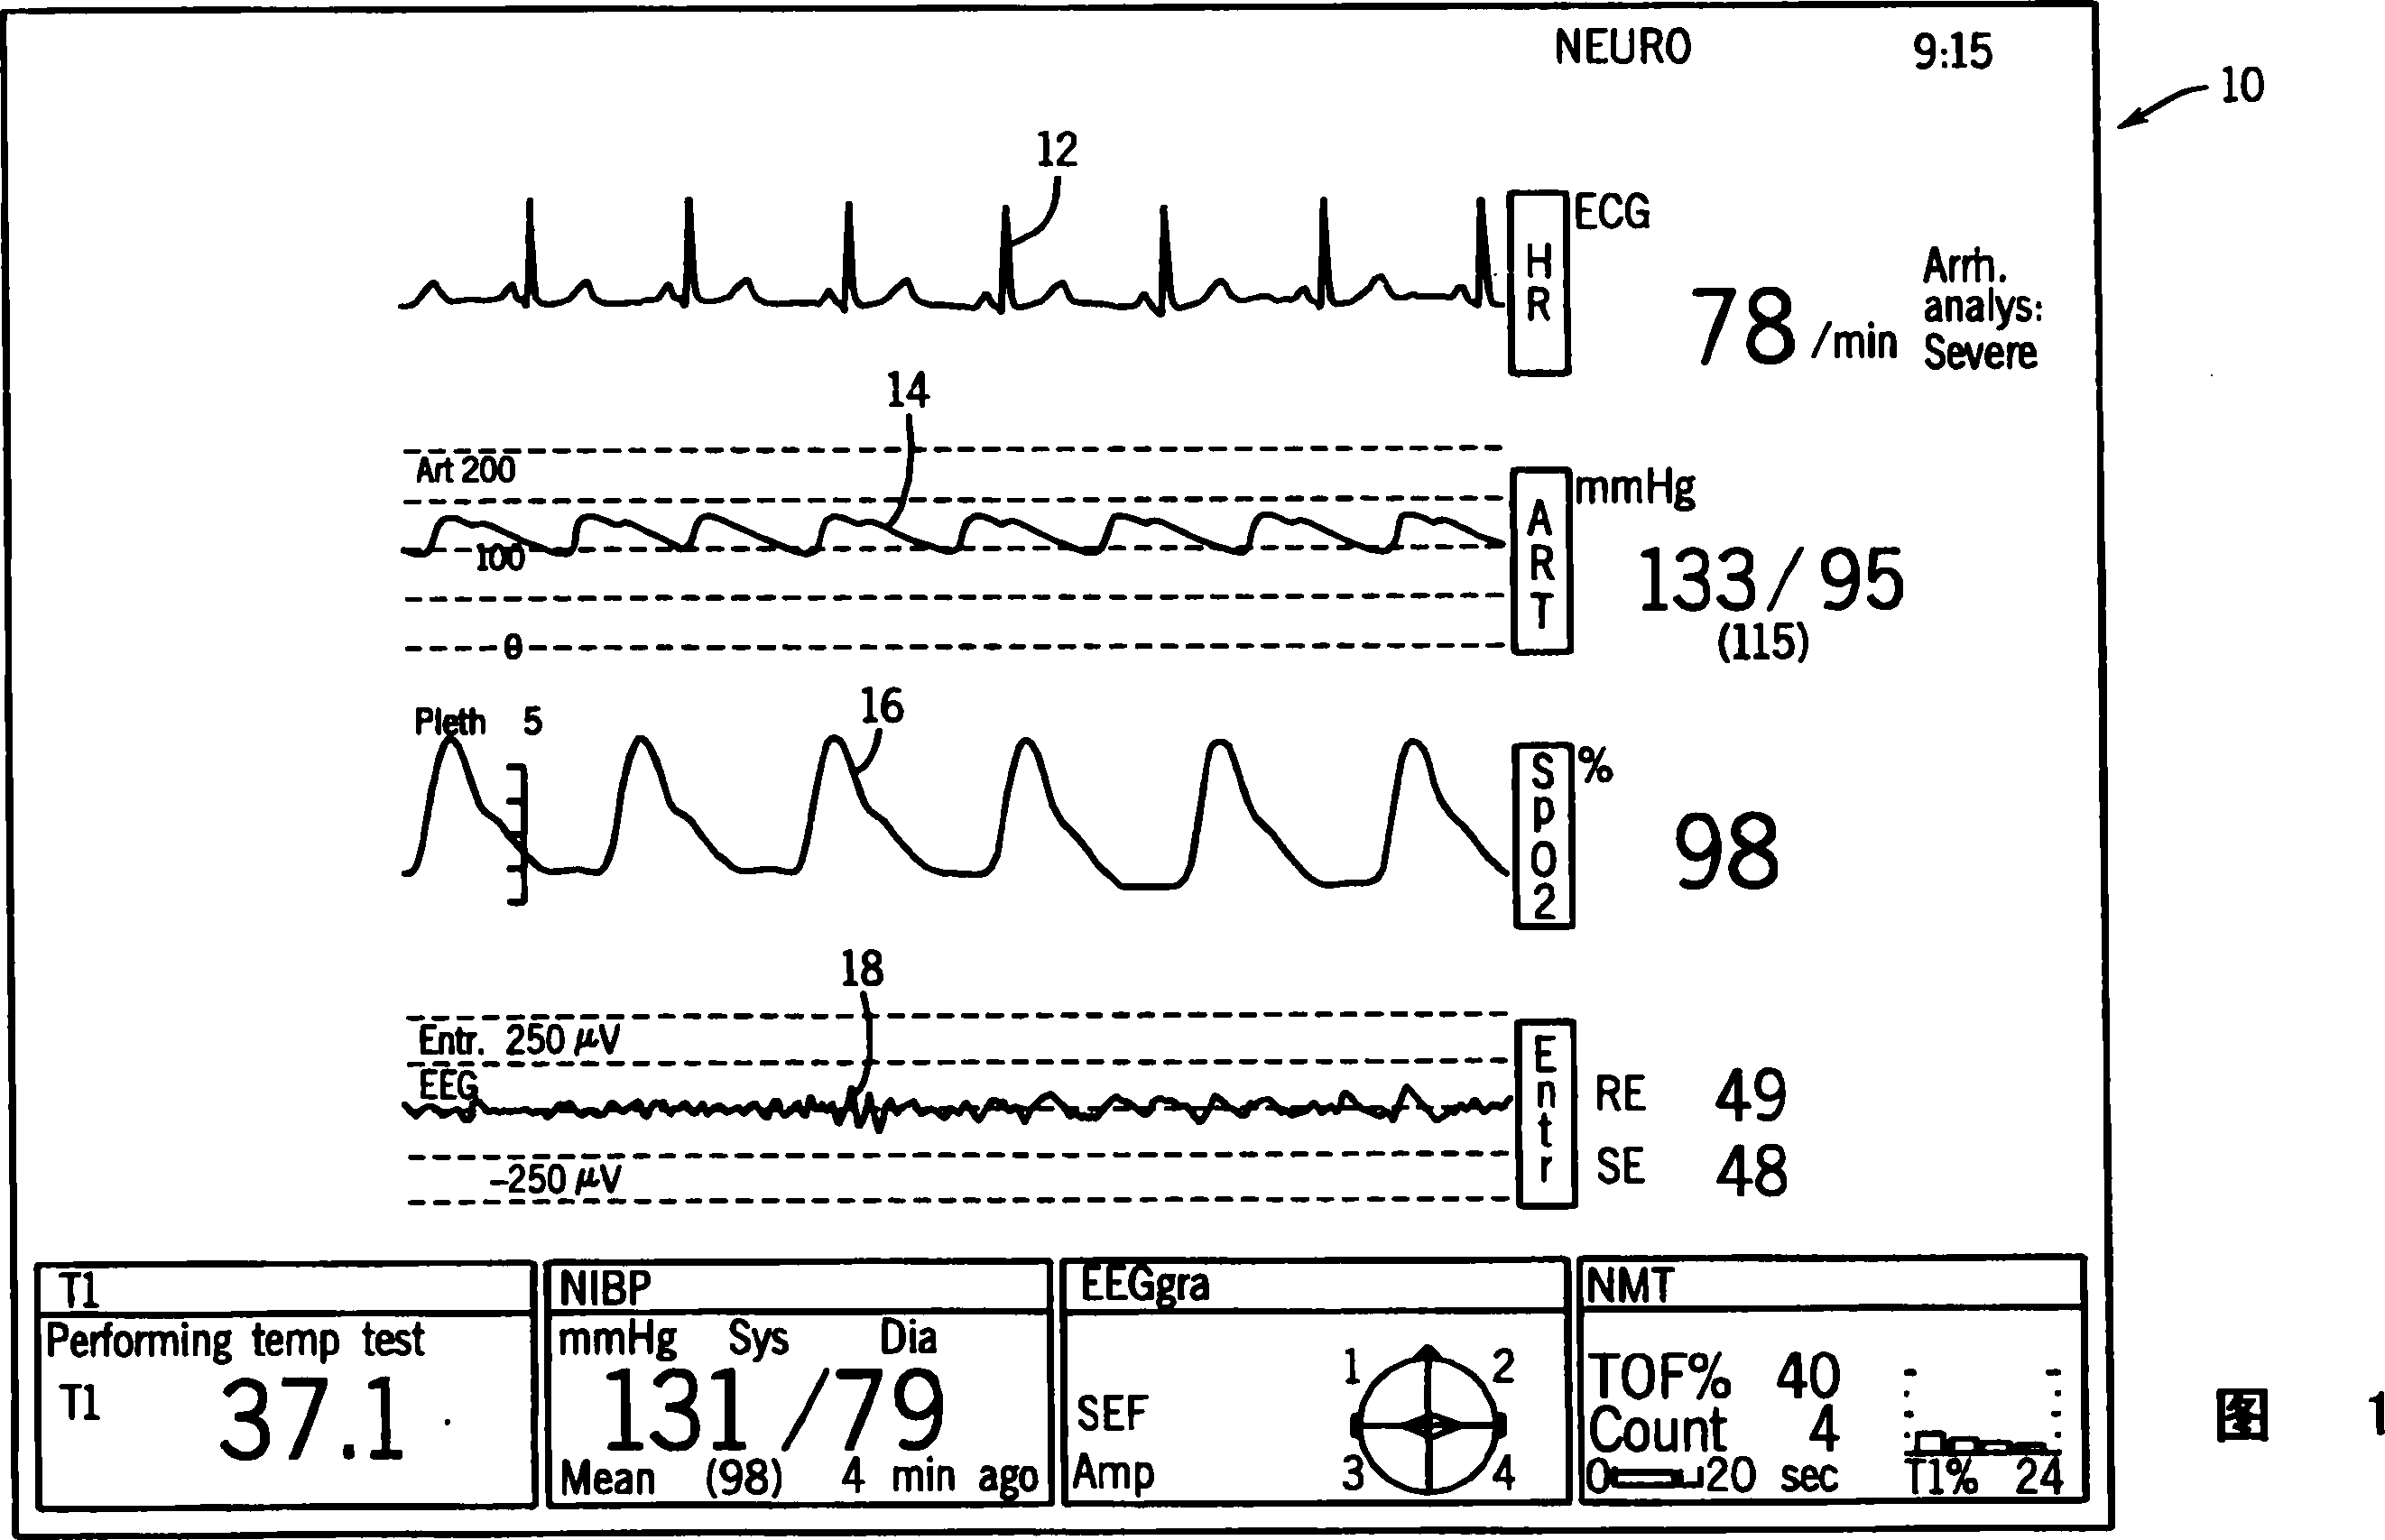 Integrated anesthesia monitoring and ultrasound display